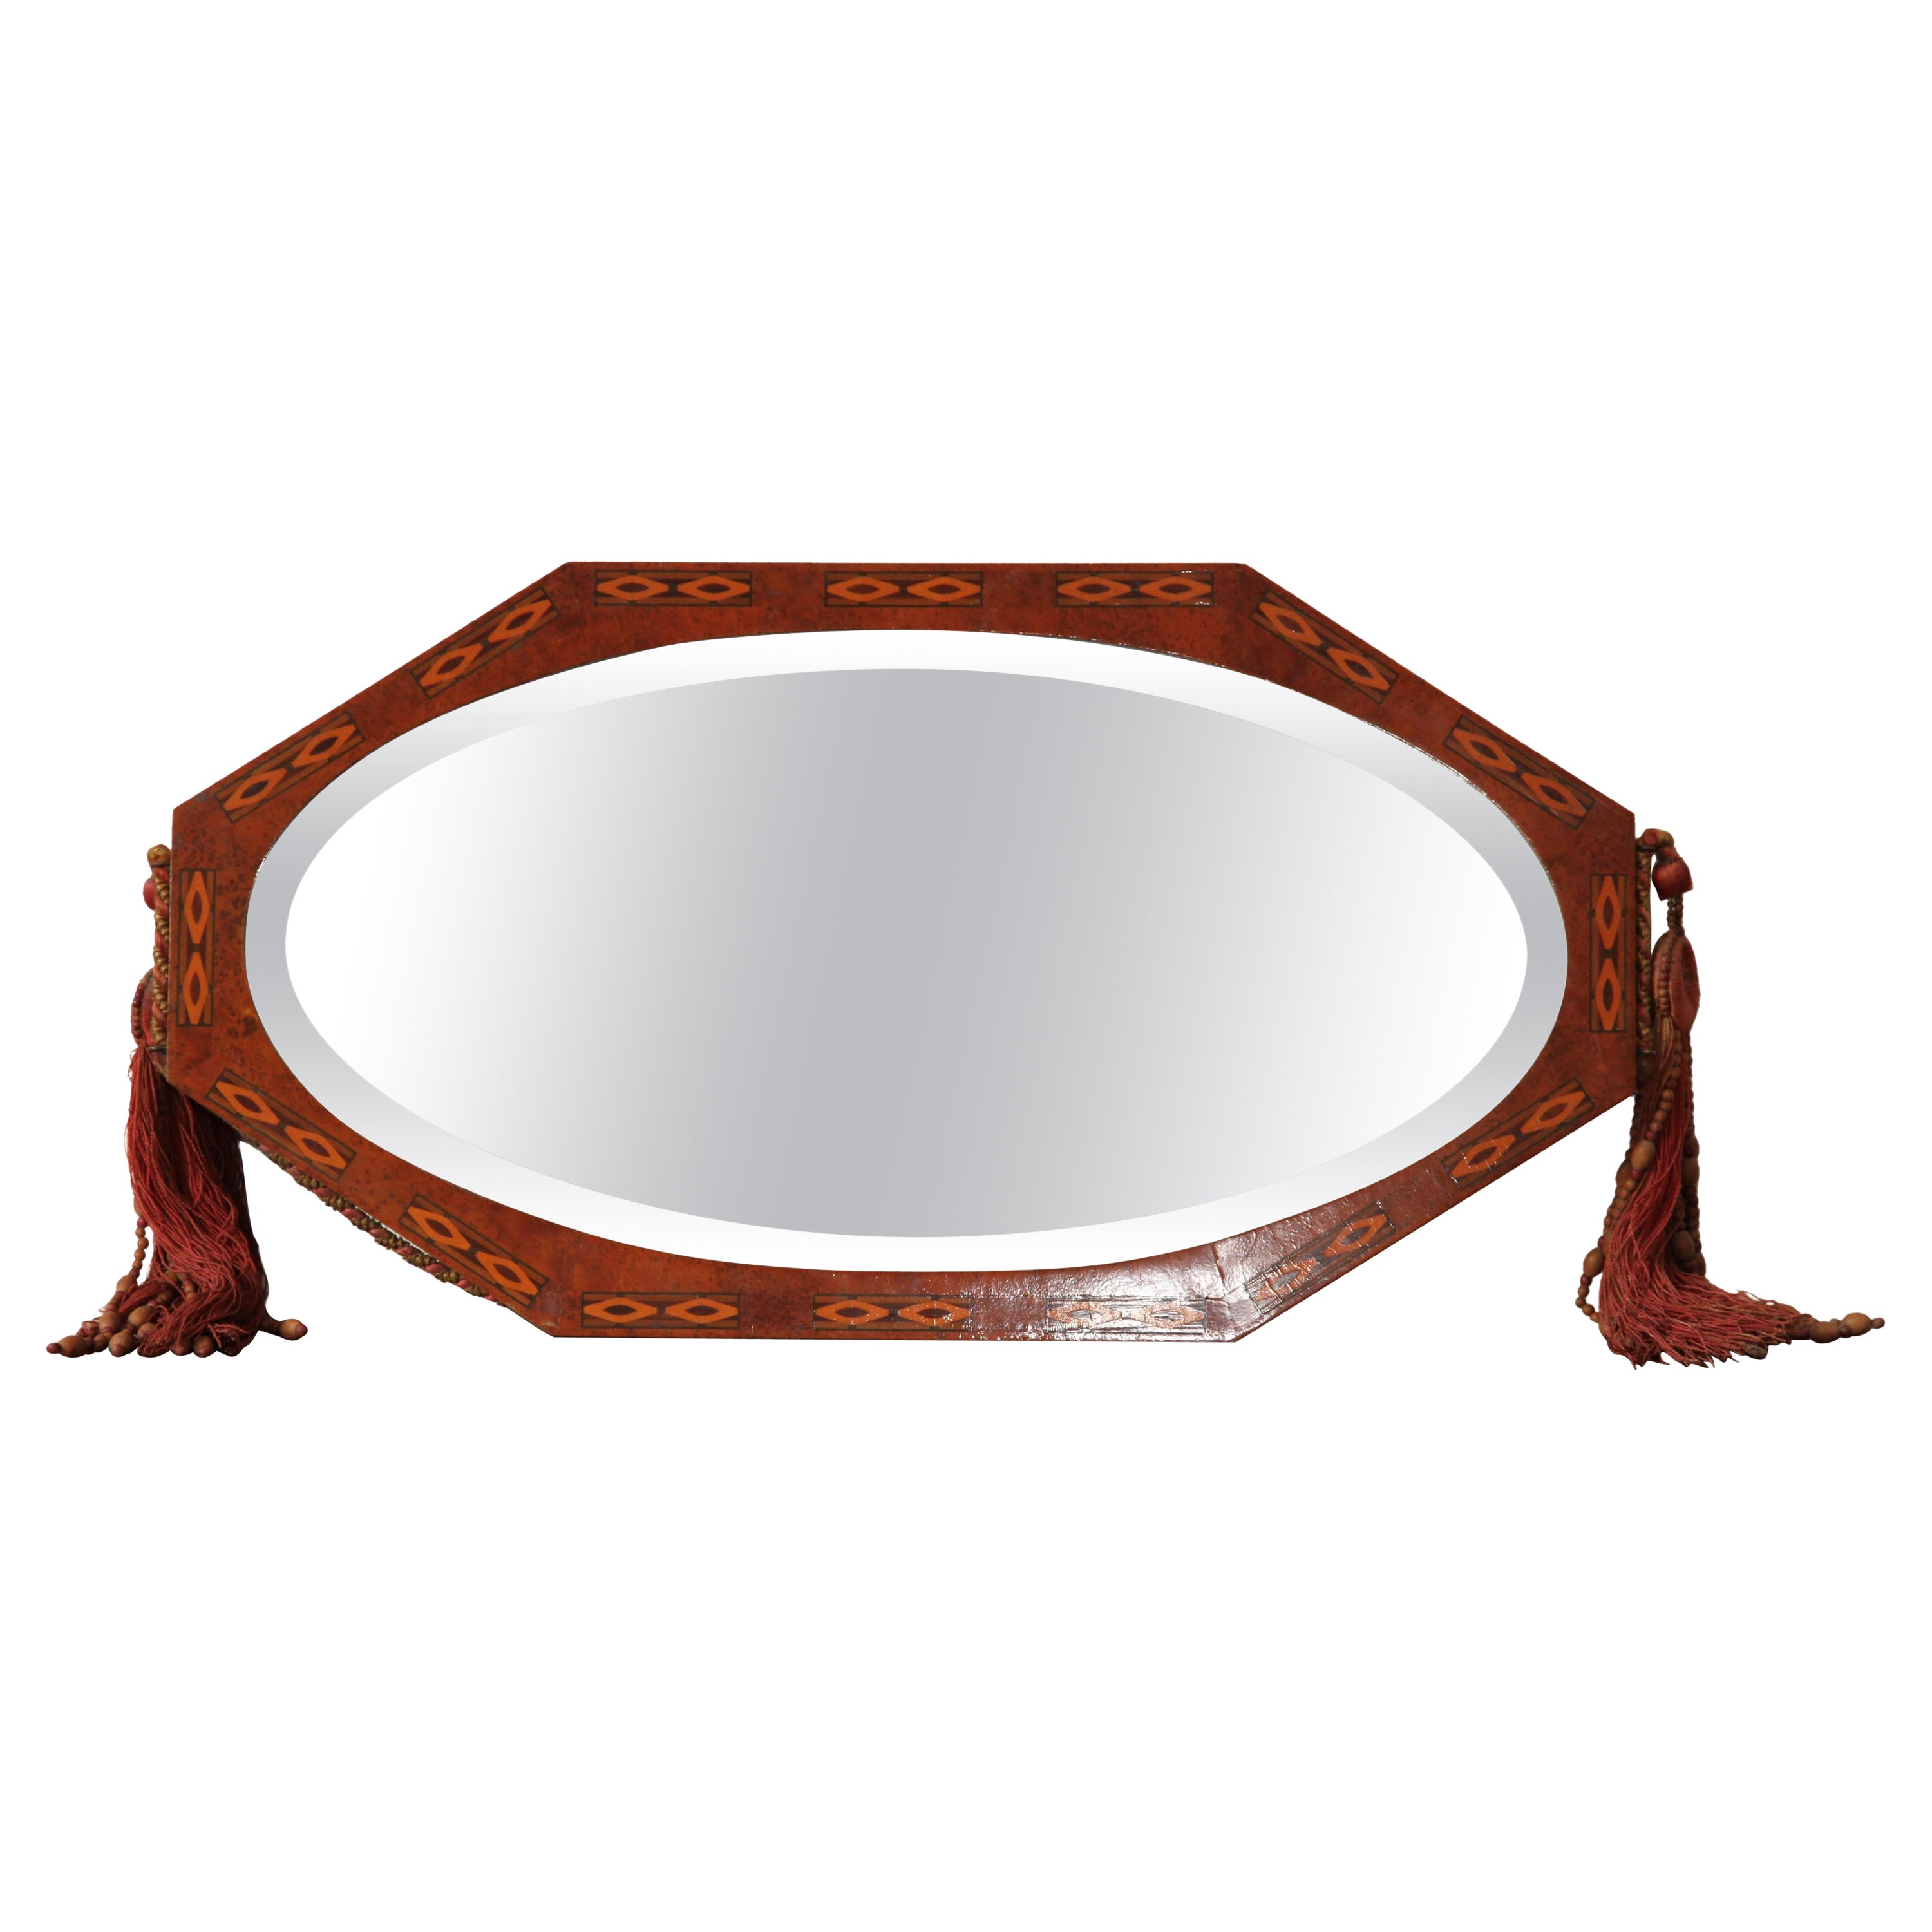 French Art Deco Octagonal Wall Mirror in the Style of Maurice Dufrène